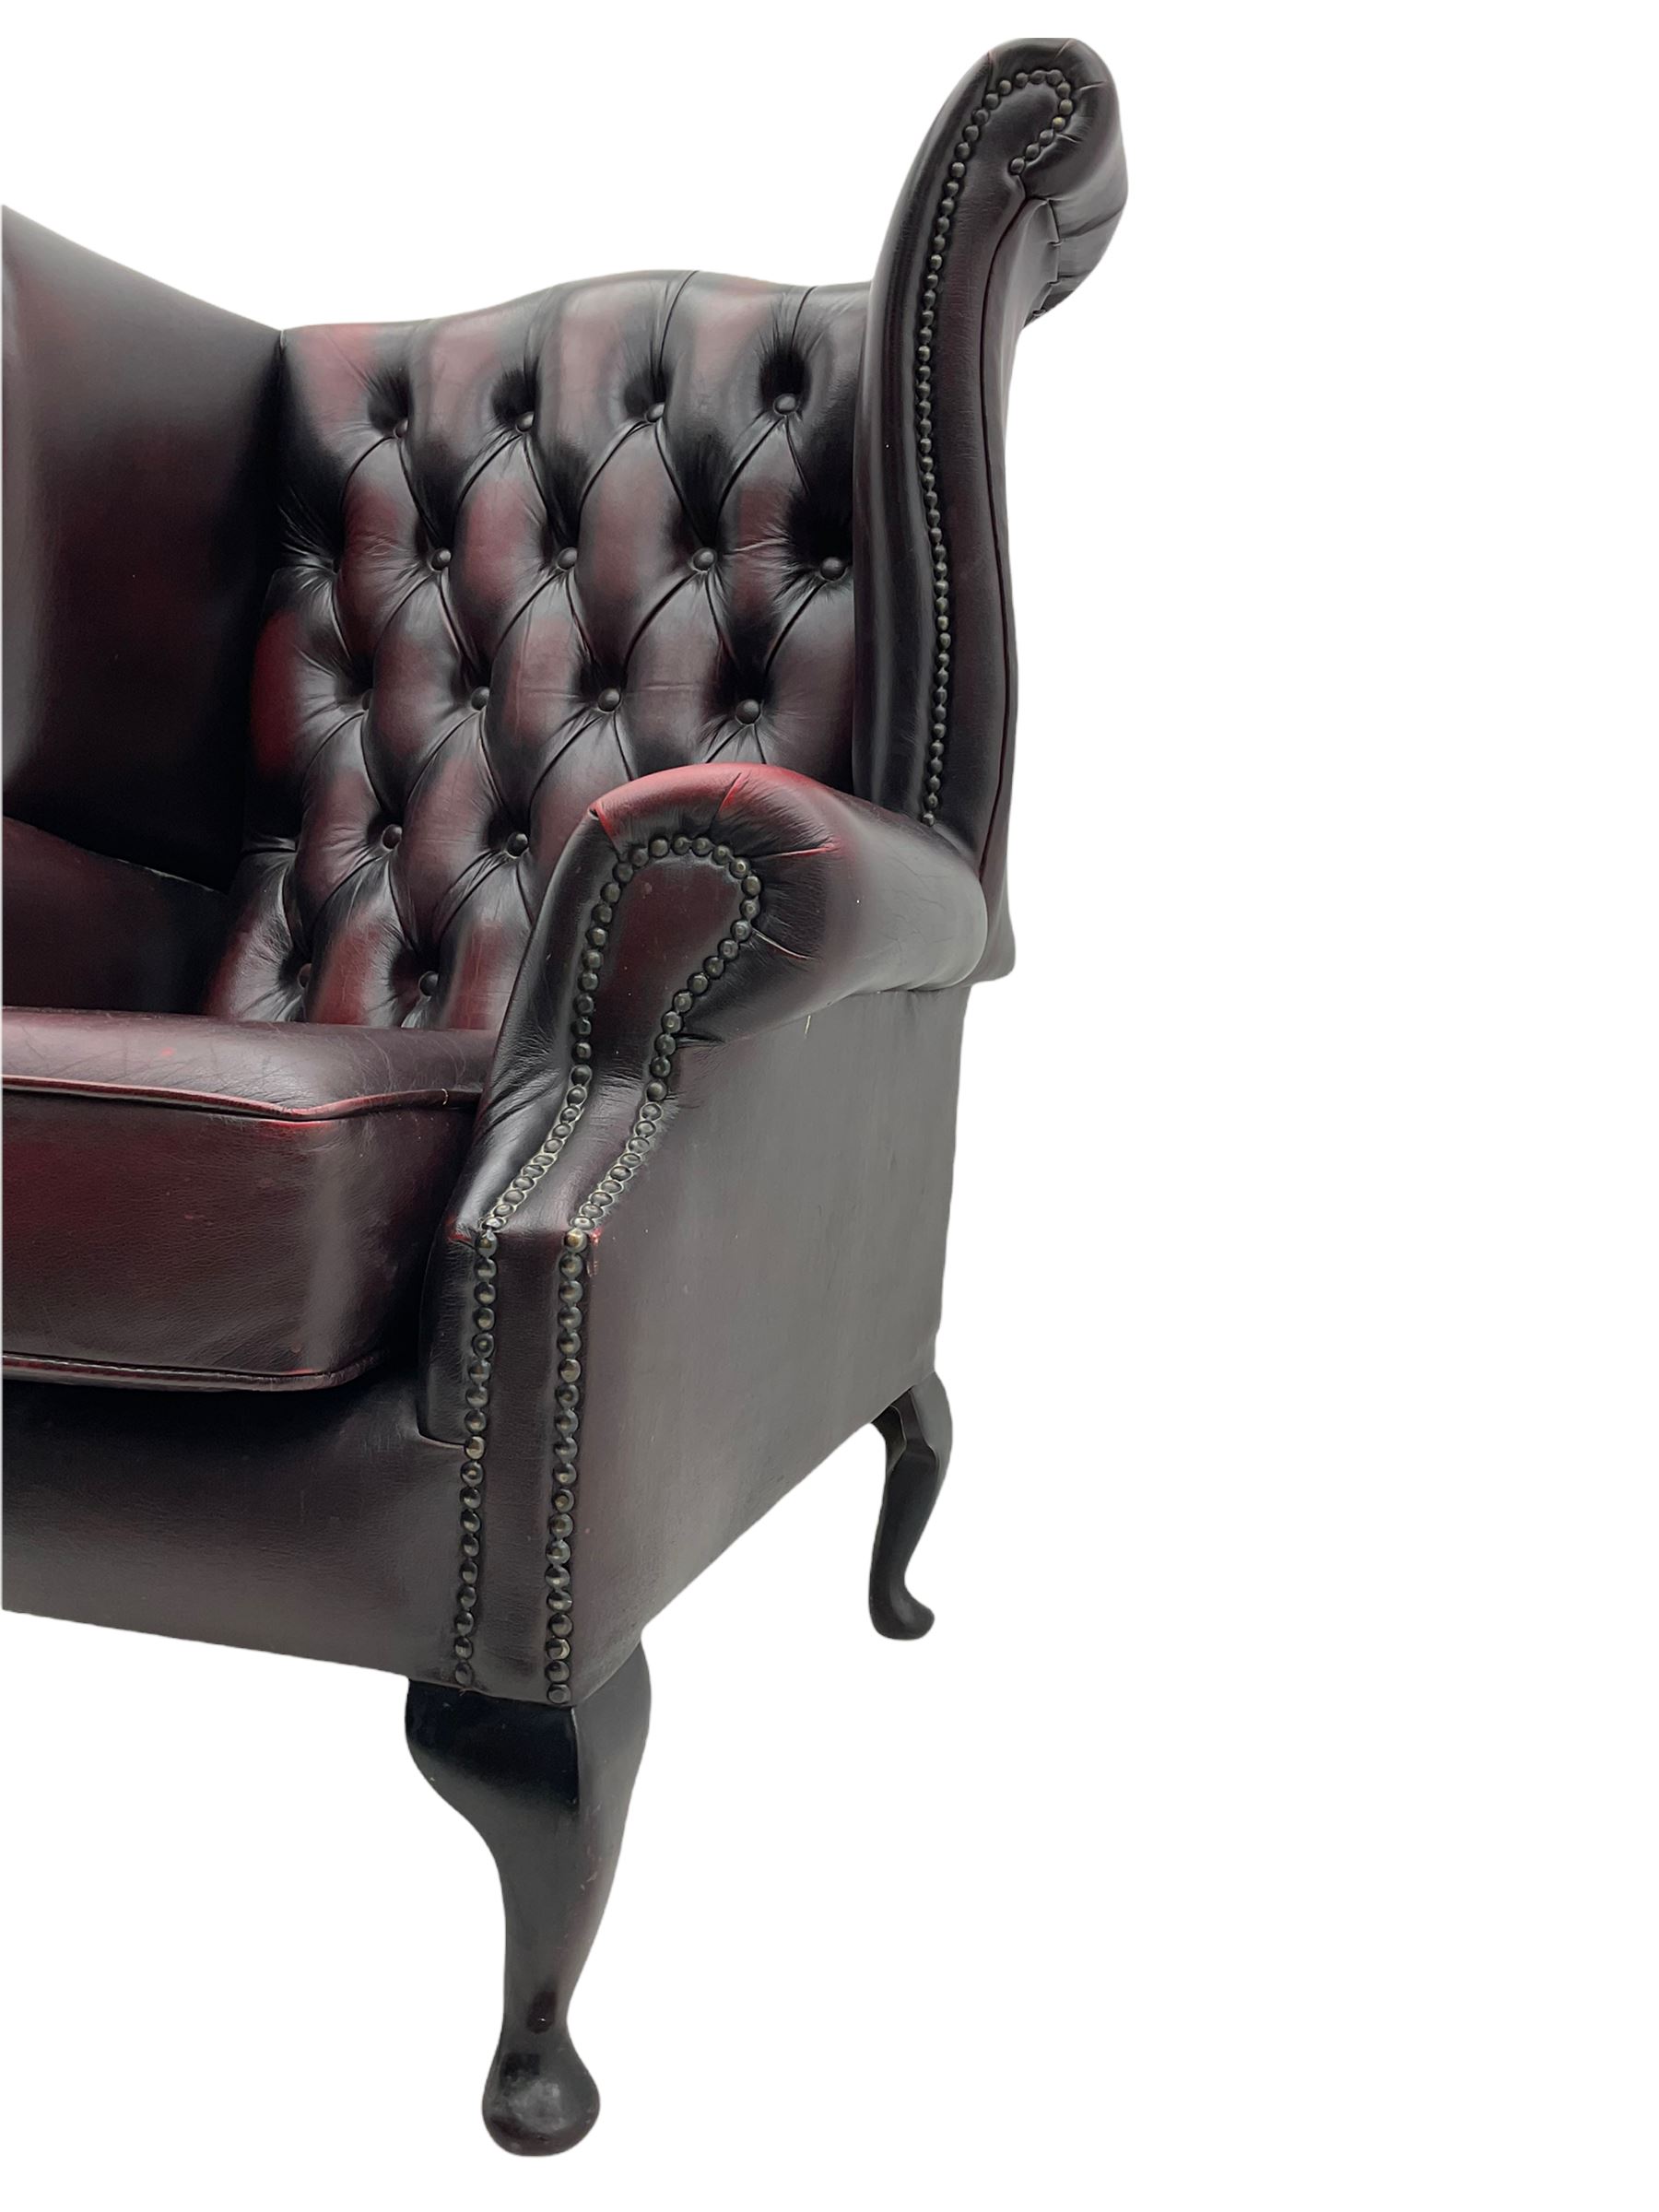 Georgian style wing back armchair - Image 4 of 7